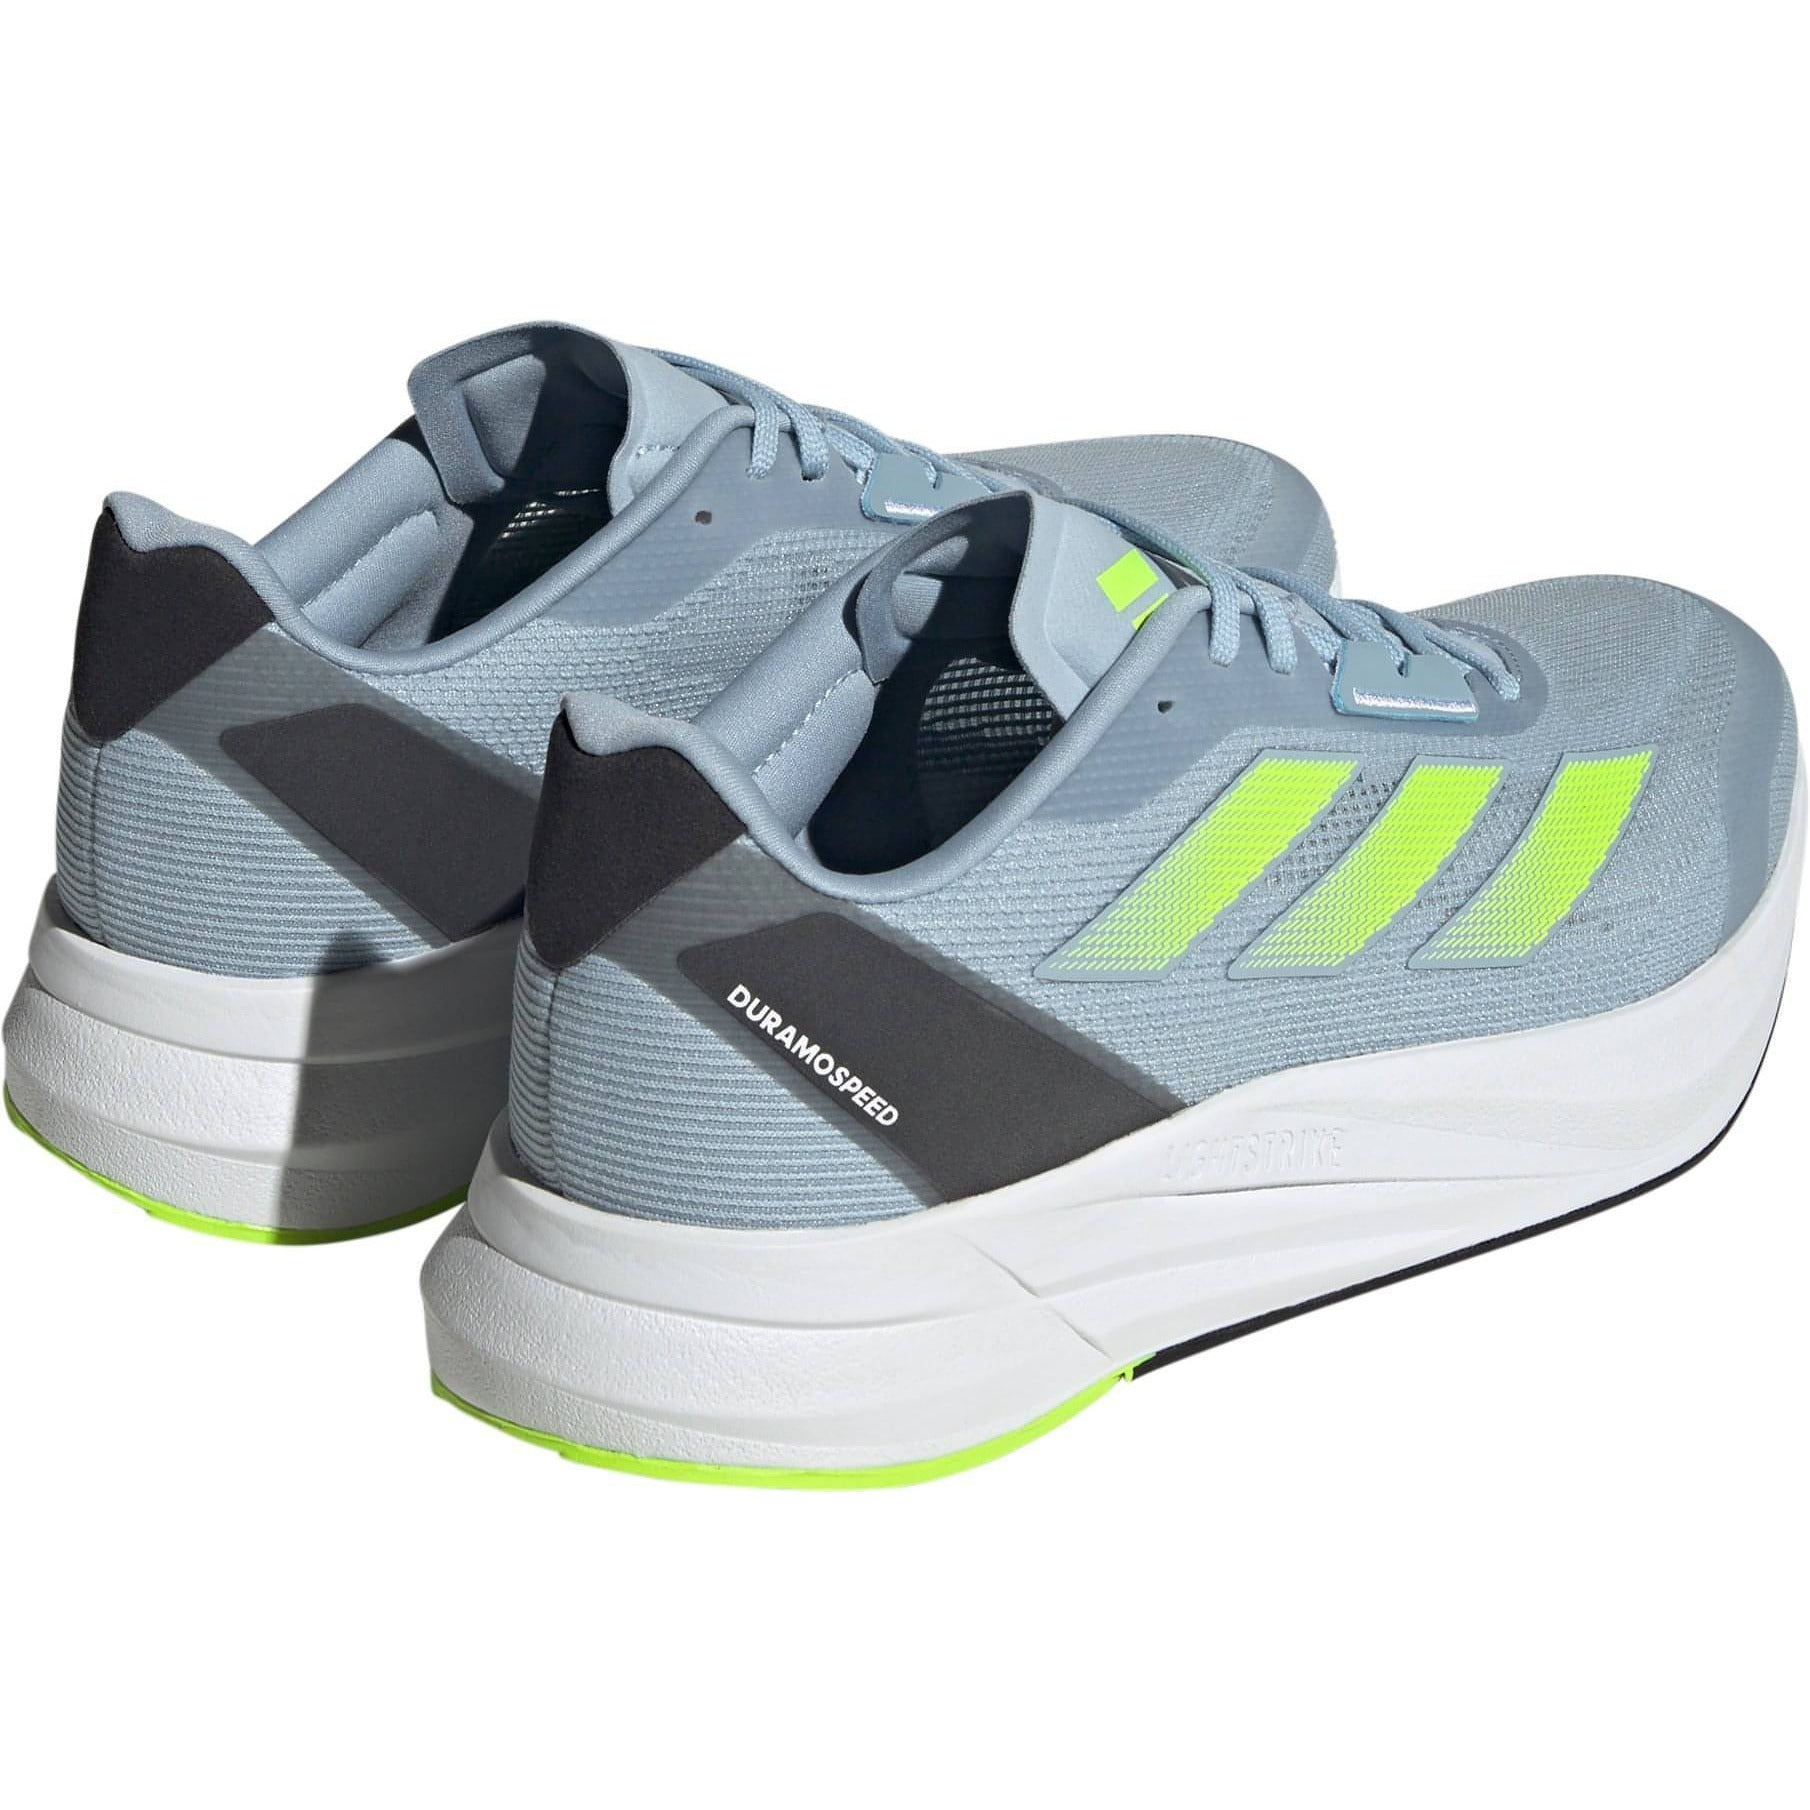 Adidas Duramo Speed Shoes Ie9672 Back View